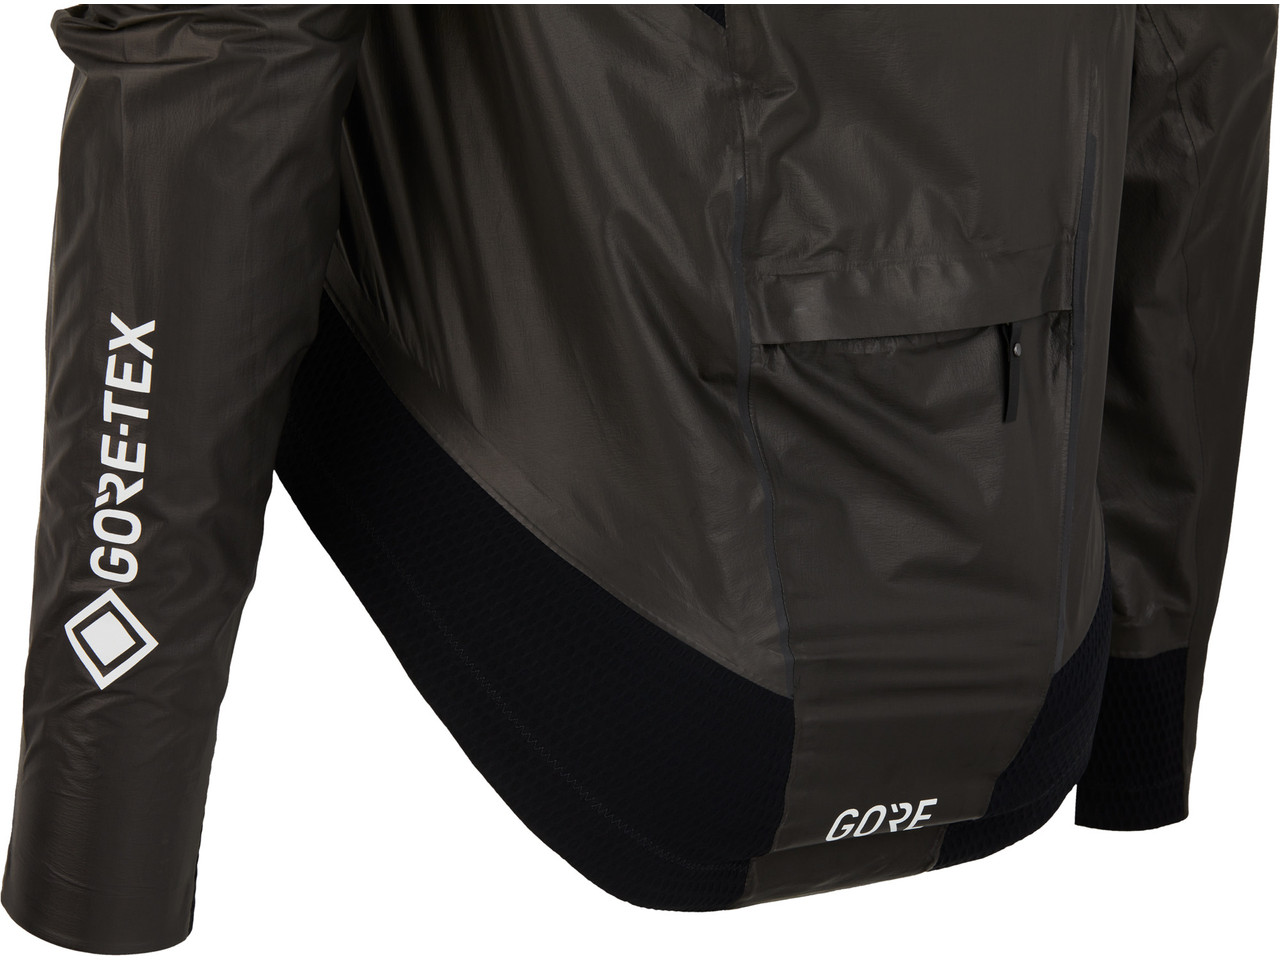 Review: Gore Wear H5 Gore-Tex Shakedry Jacket